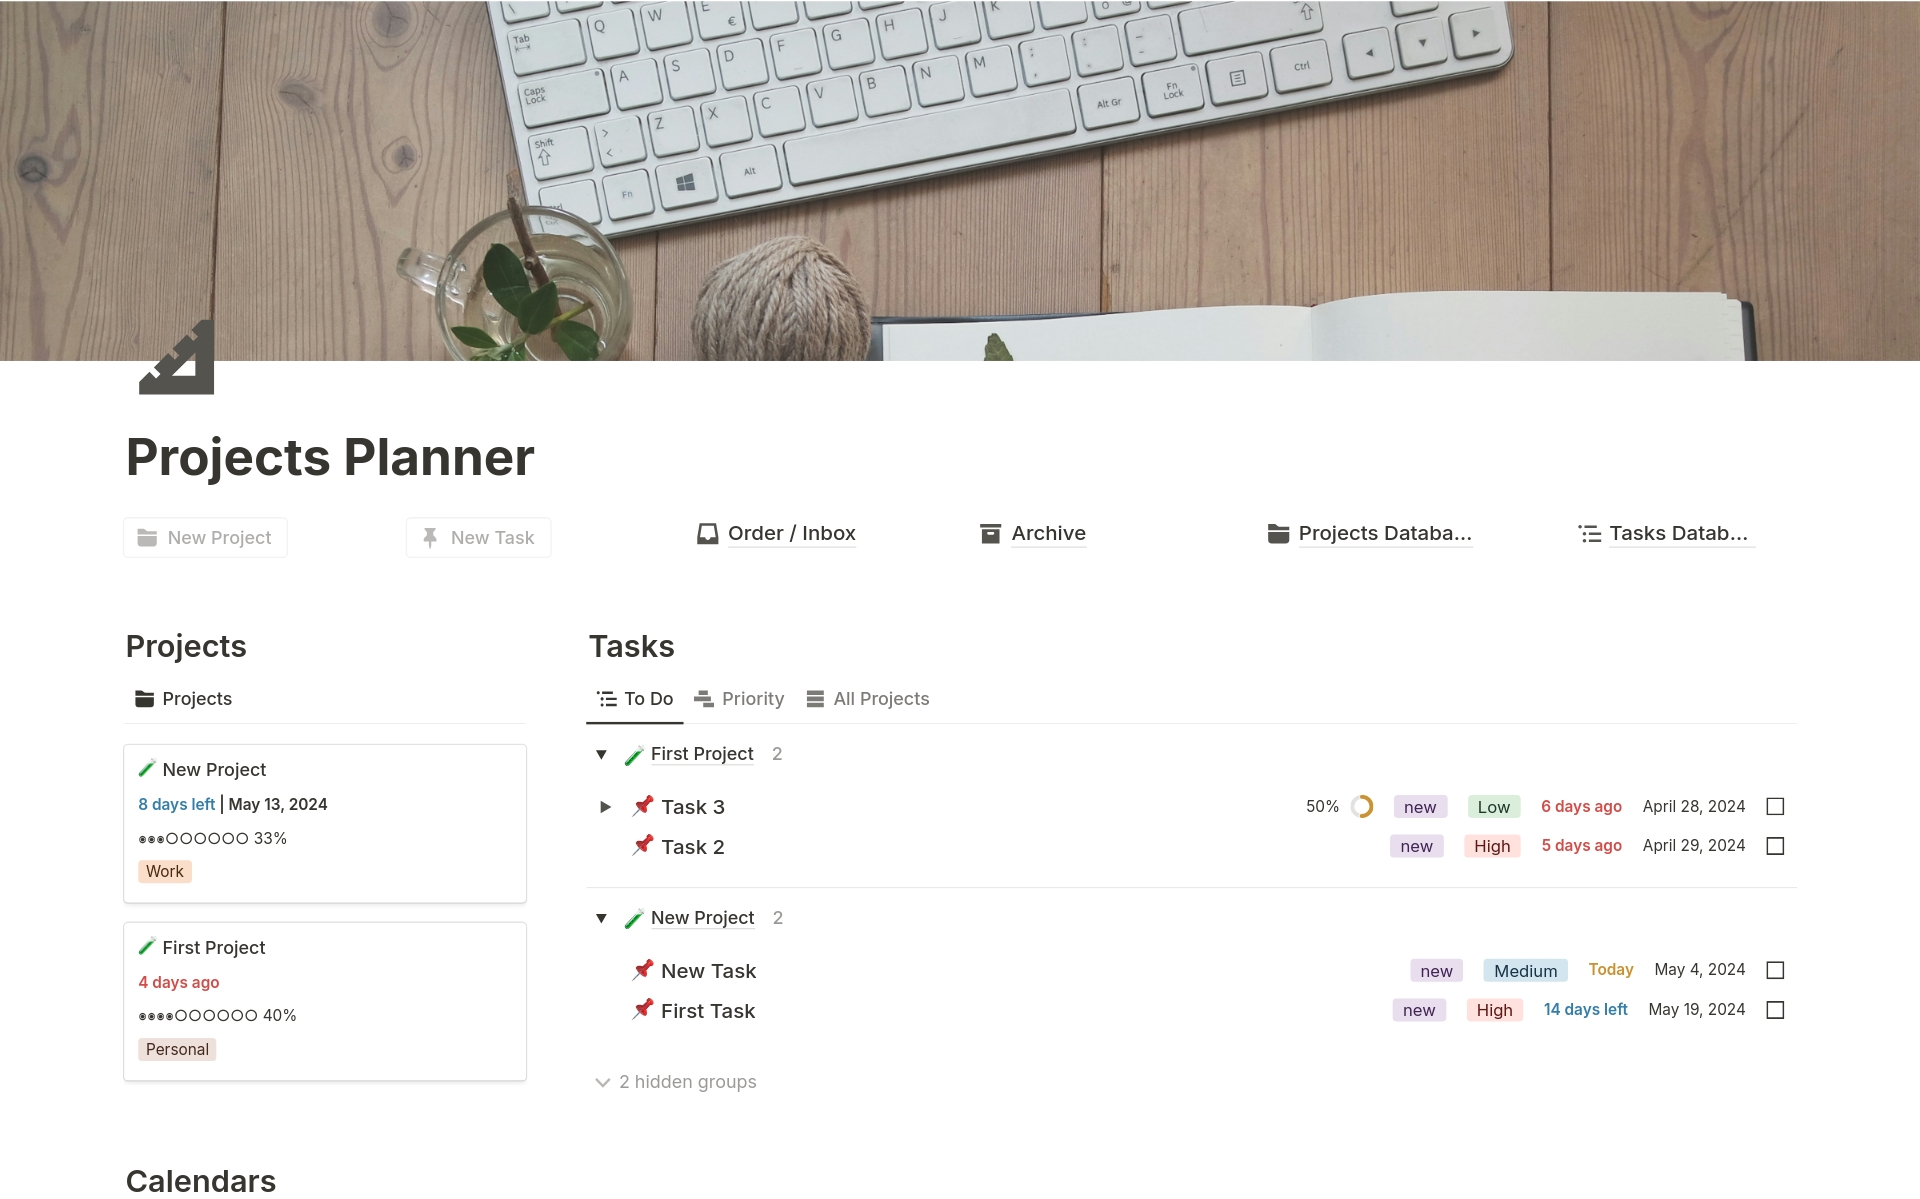 With this template you can plan, organize and follow the progress of your projects.